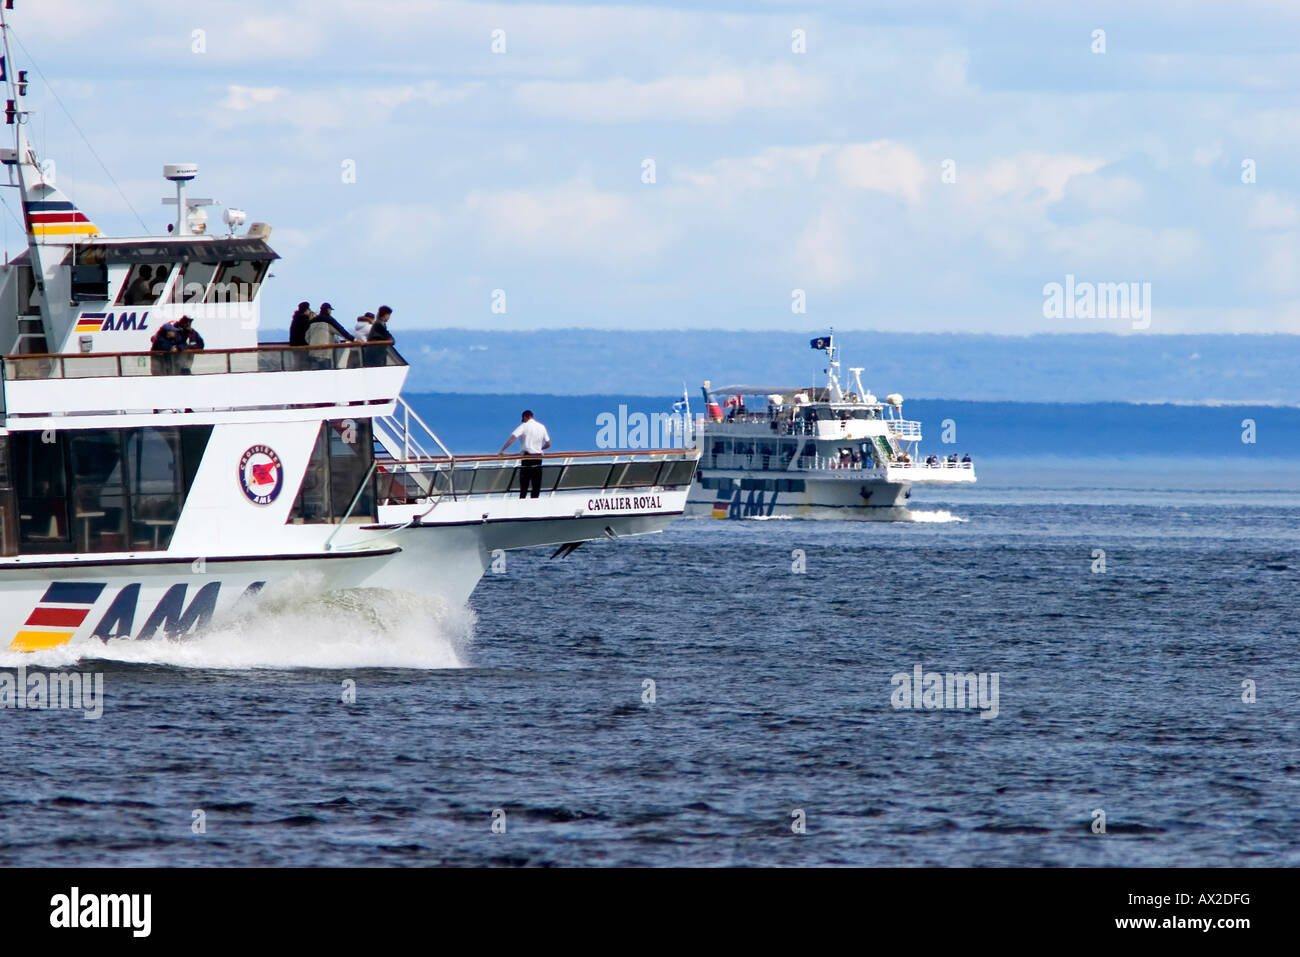 Two 'Croisières AML' whale watching cruising ships on the Saint Lawrence river Stock Photo